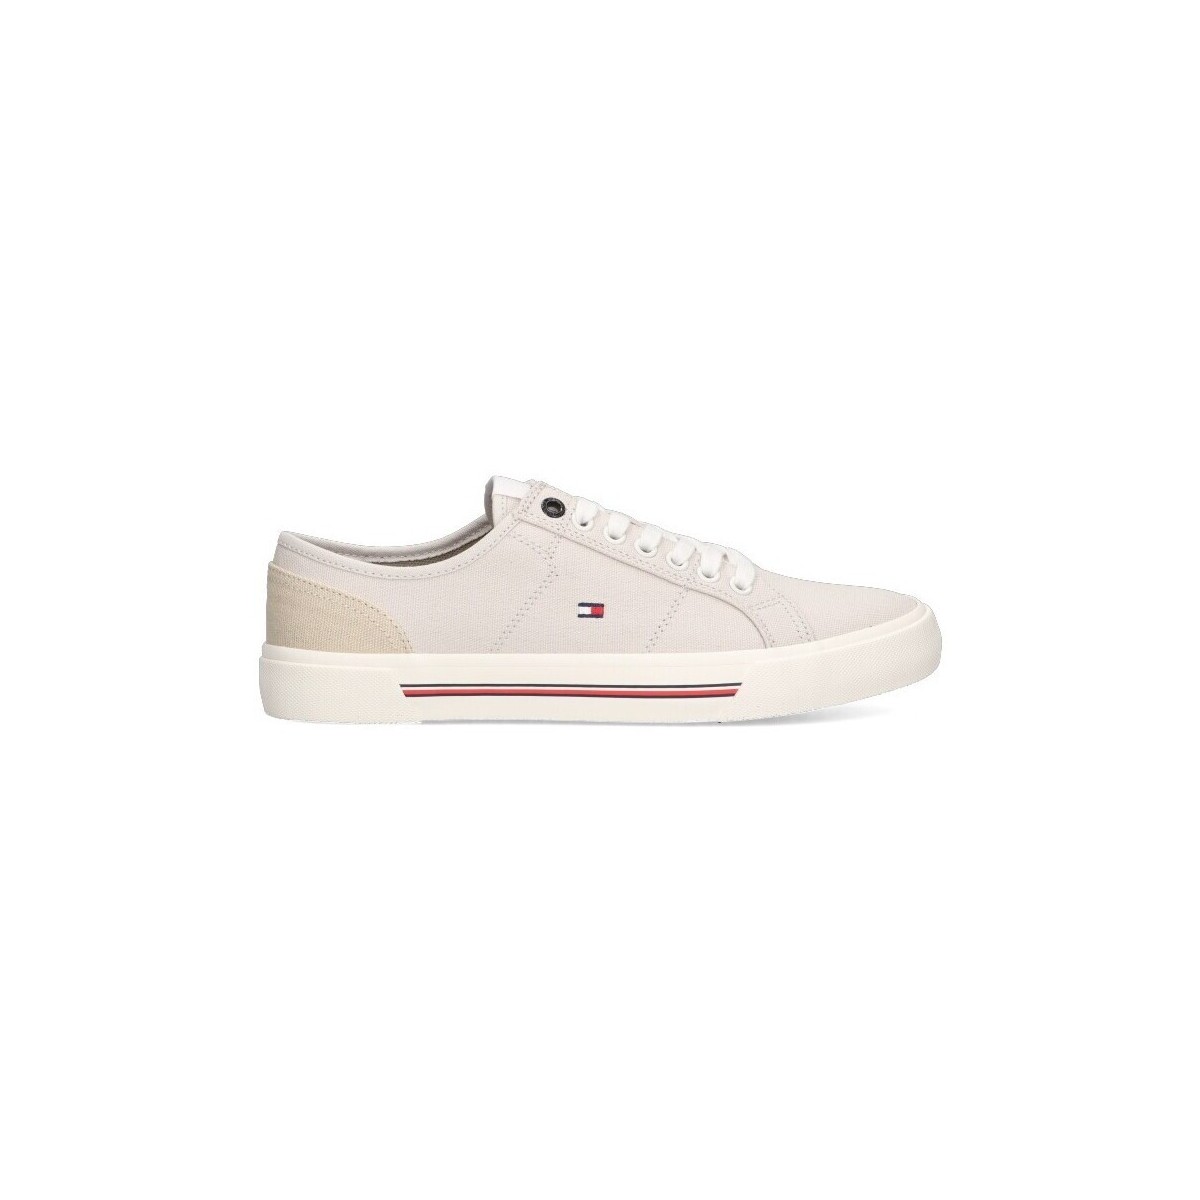 Xαμηλά Sneakers Tommy Hilfiger 74388